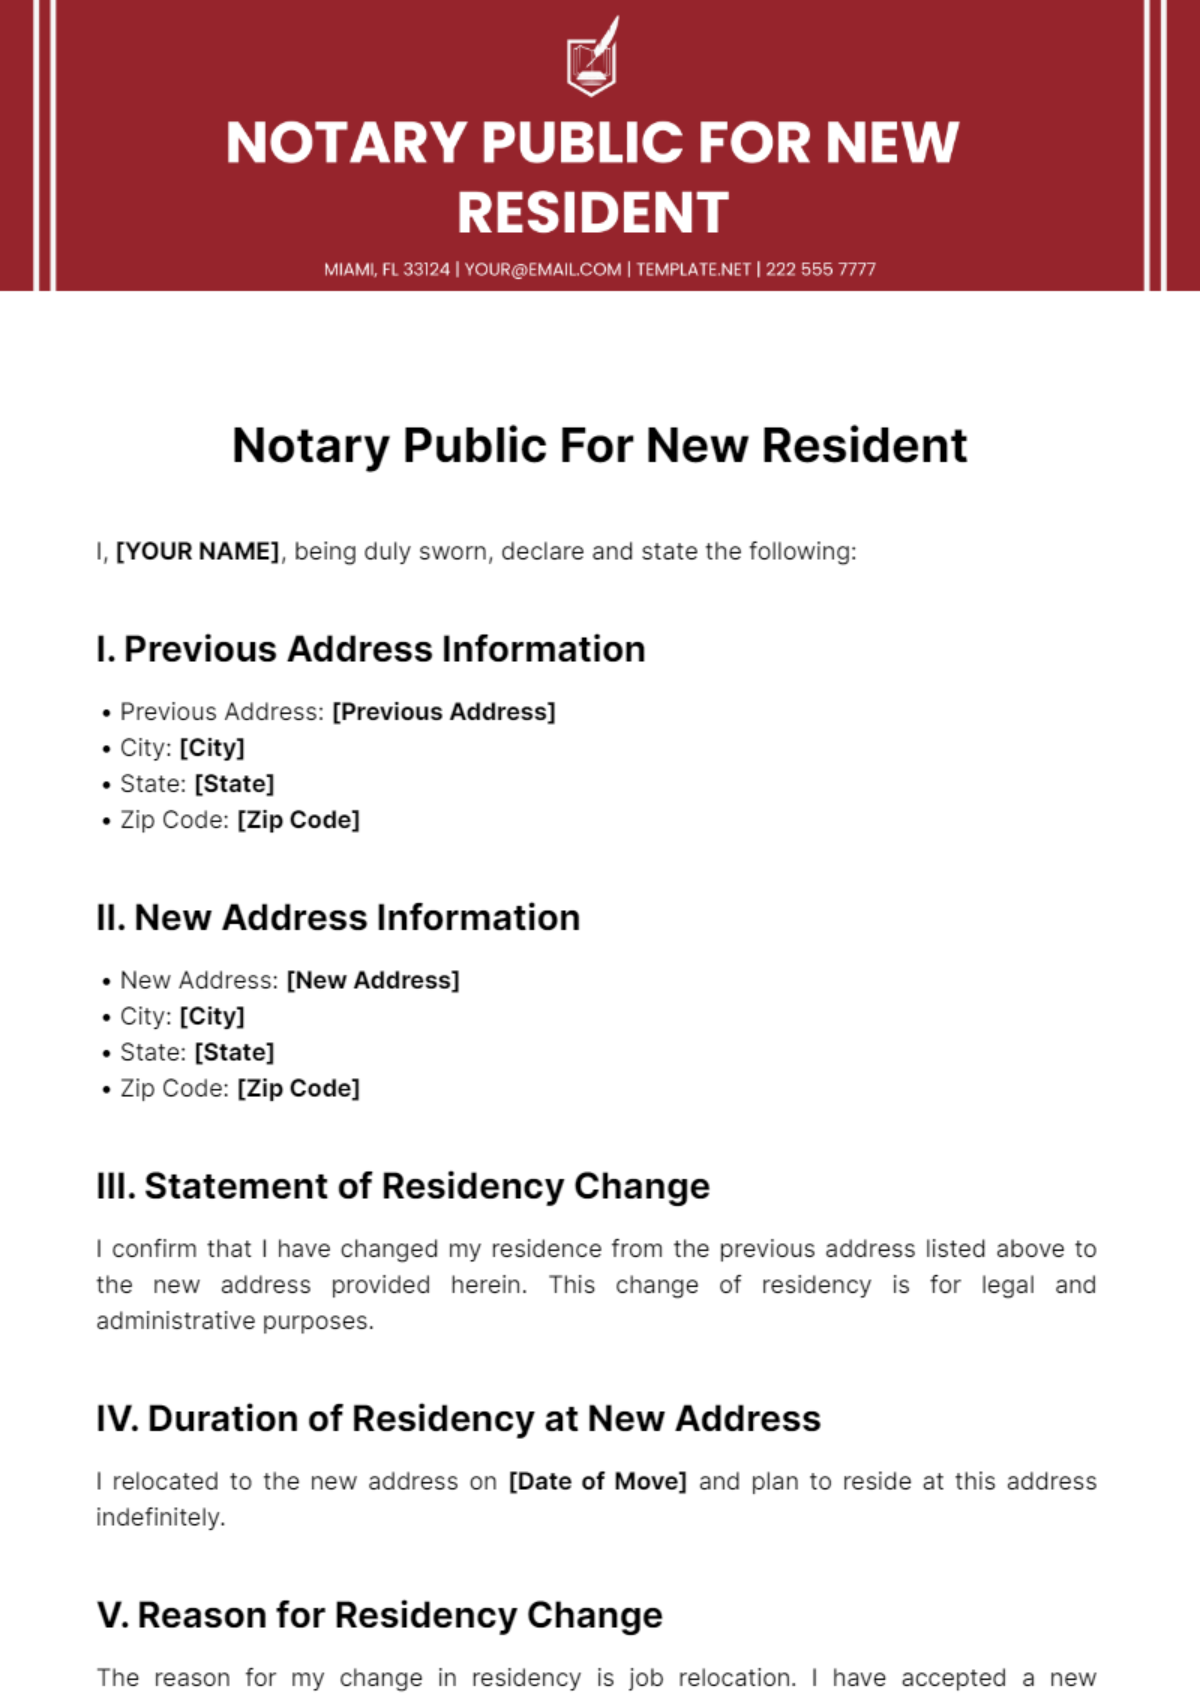 Free Notary Public For New Resident Template